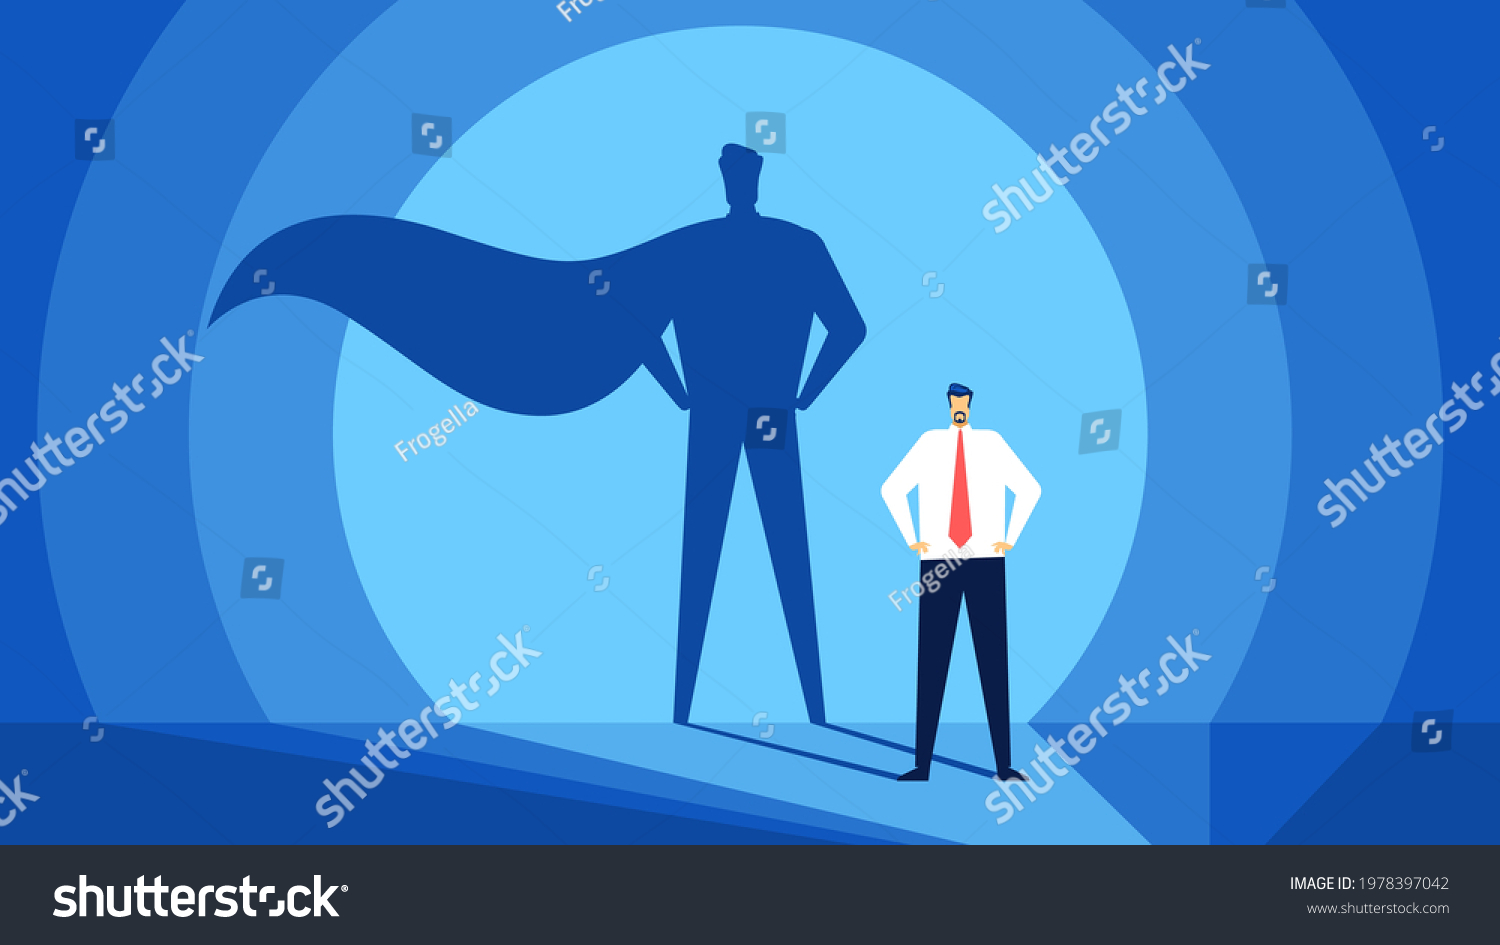 Businessman with superhero shadow. Successful and strong leader. Business success, confident leadership, ambition or power vector concept. Brave manager having career growth or promotion #1978397042